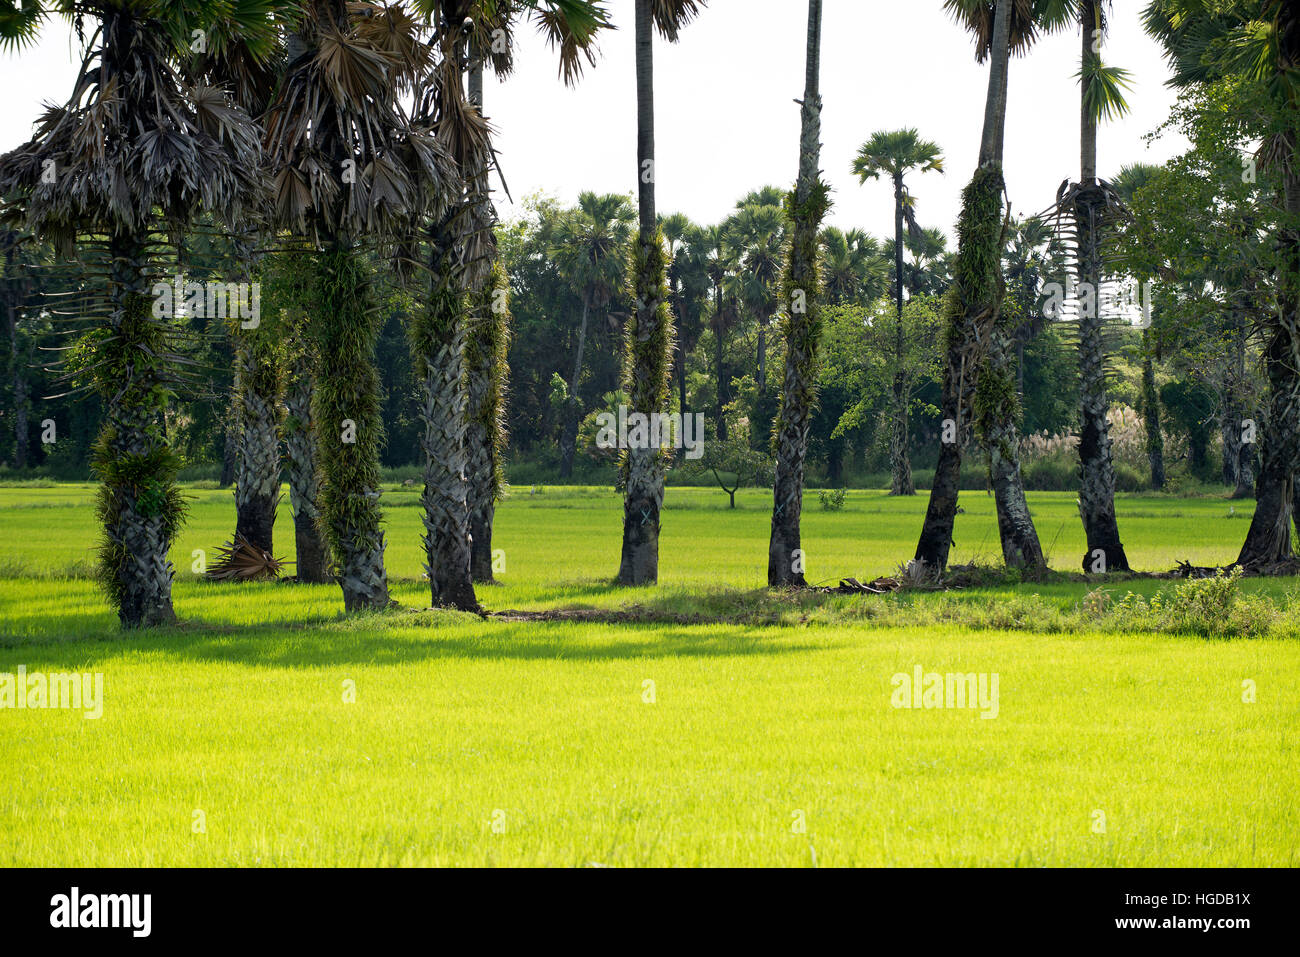 Thailand, Palm trees in the midden of rice paddies Stock Photo